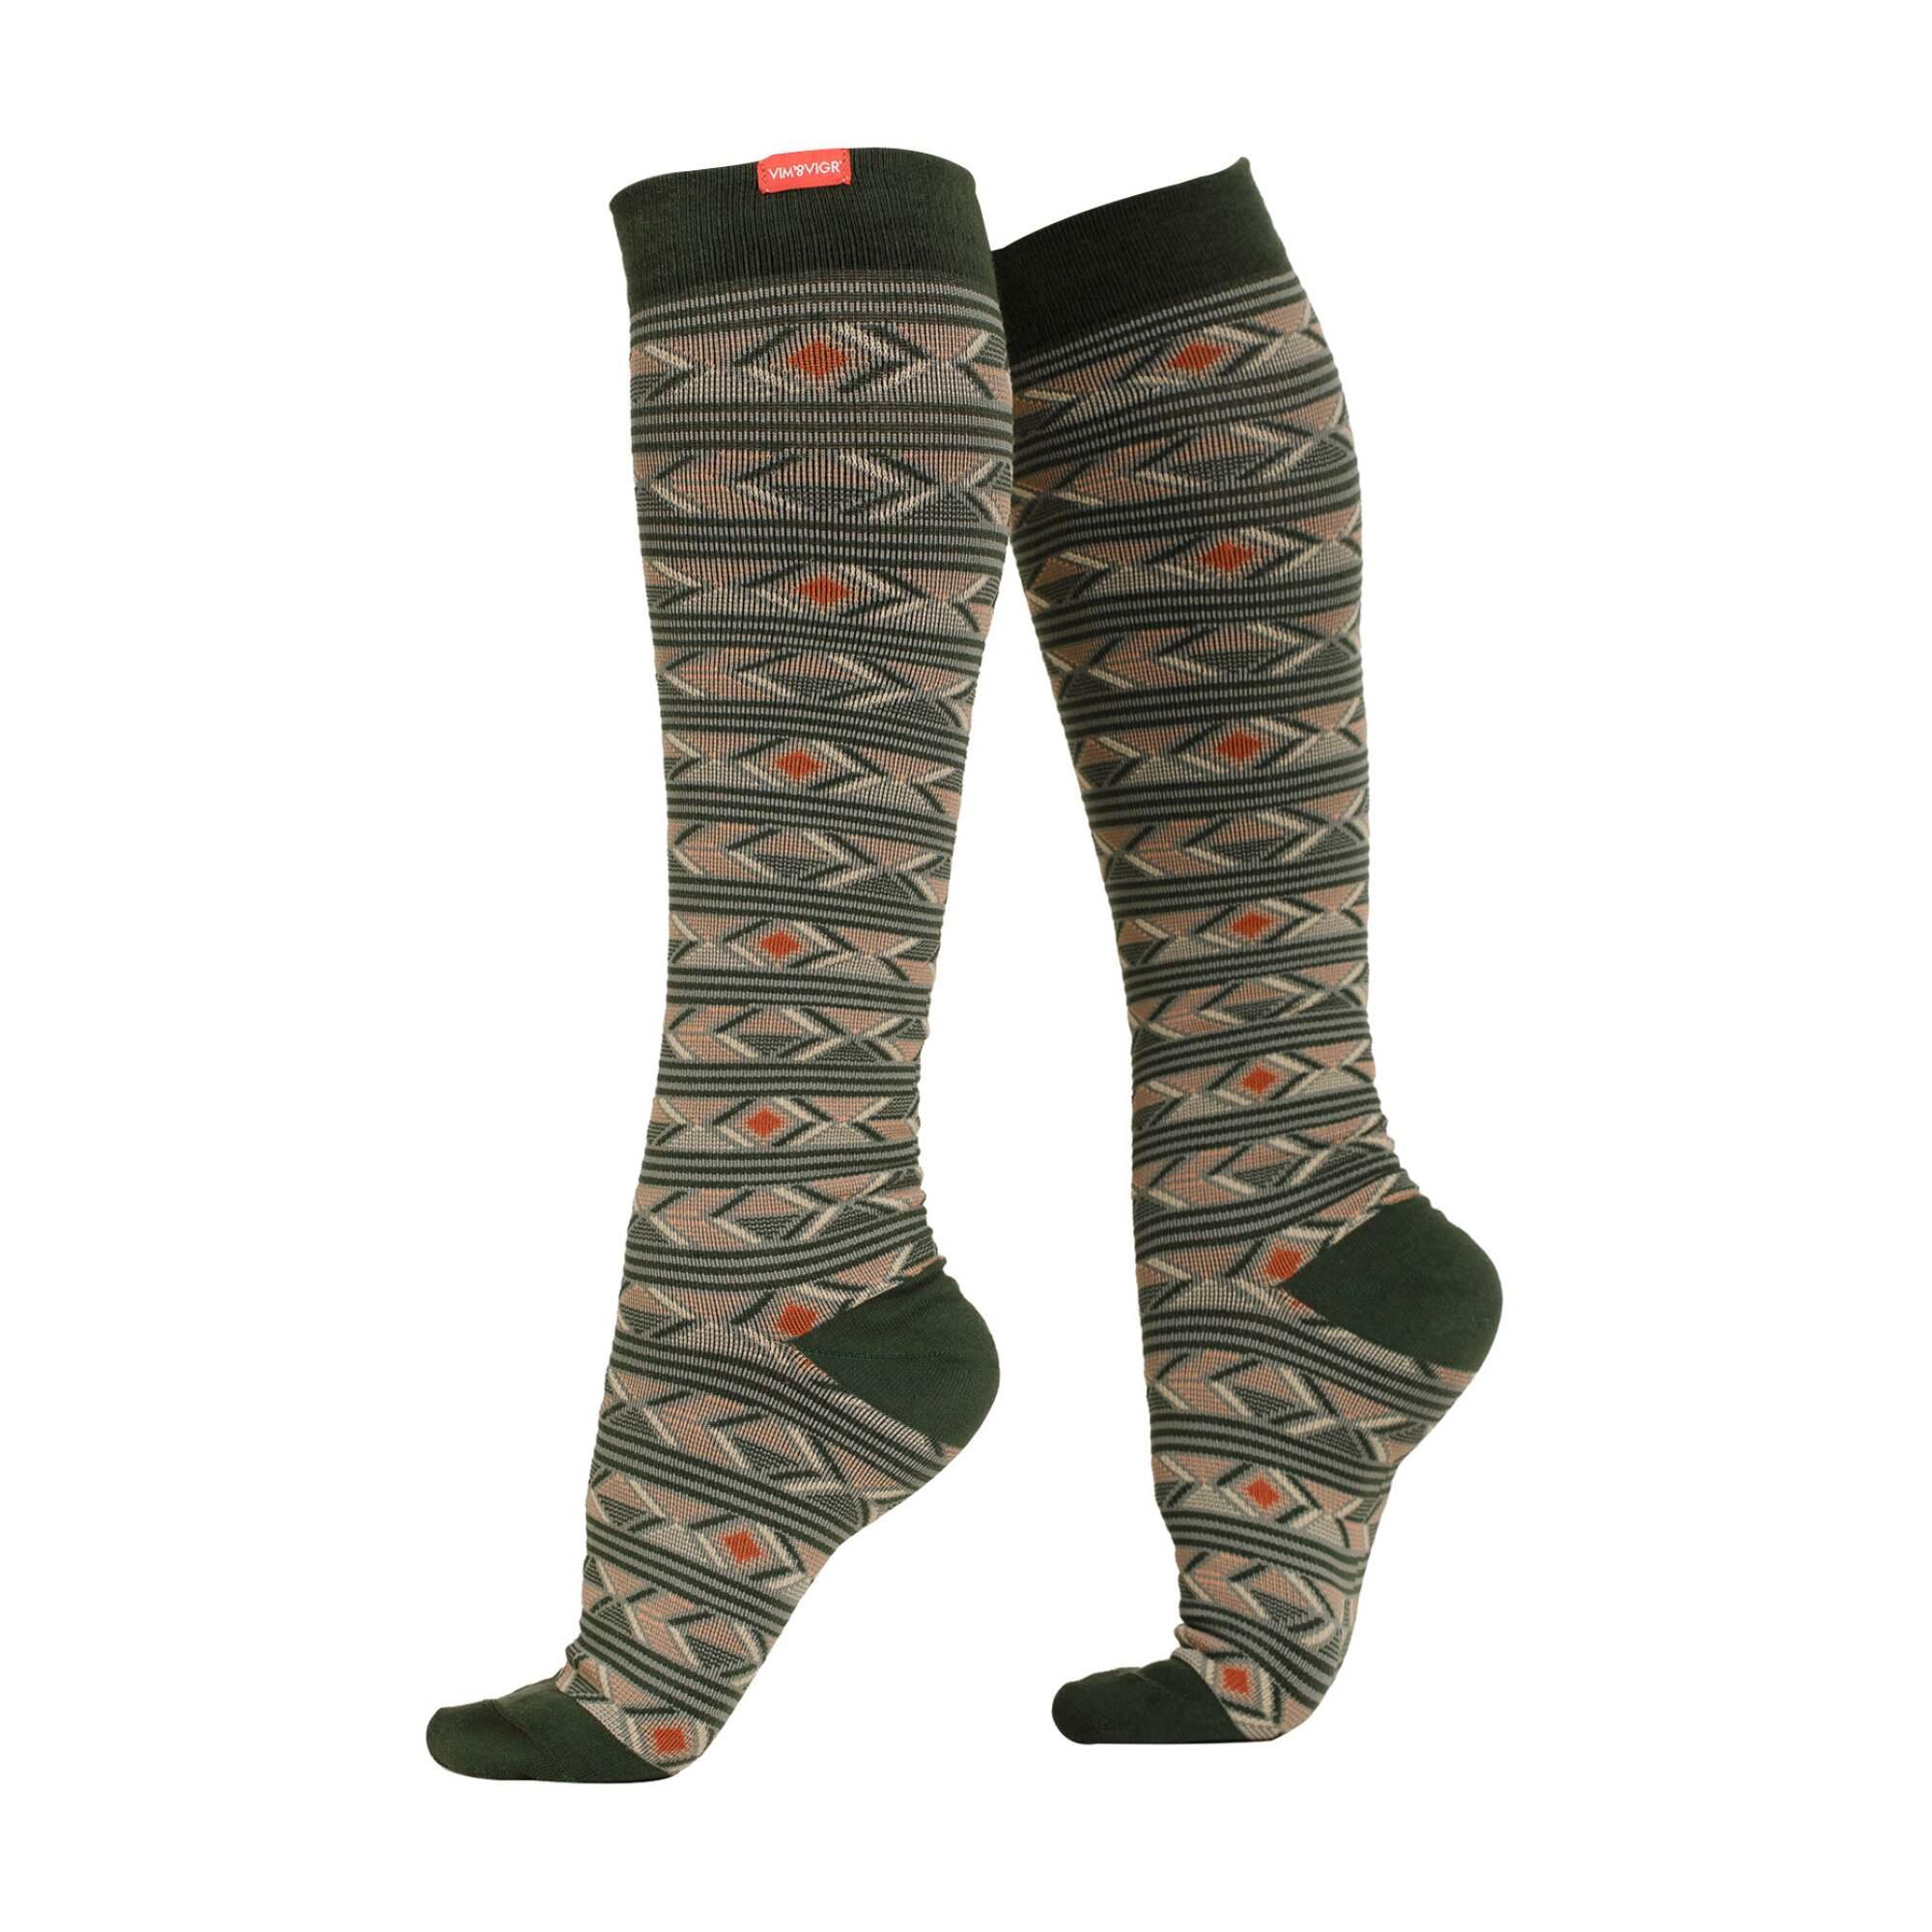 Compression Socks for Women and Men Support Graduated 15-20 mmHg